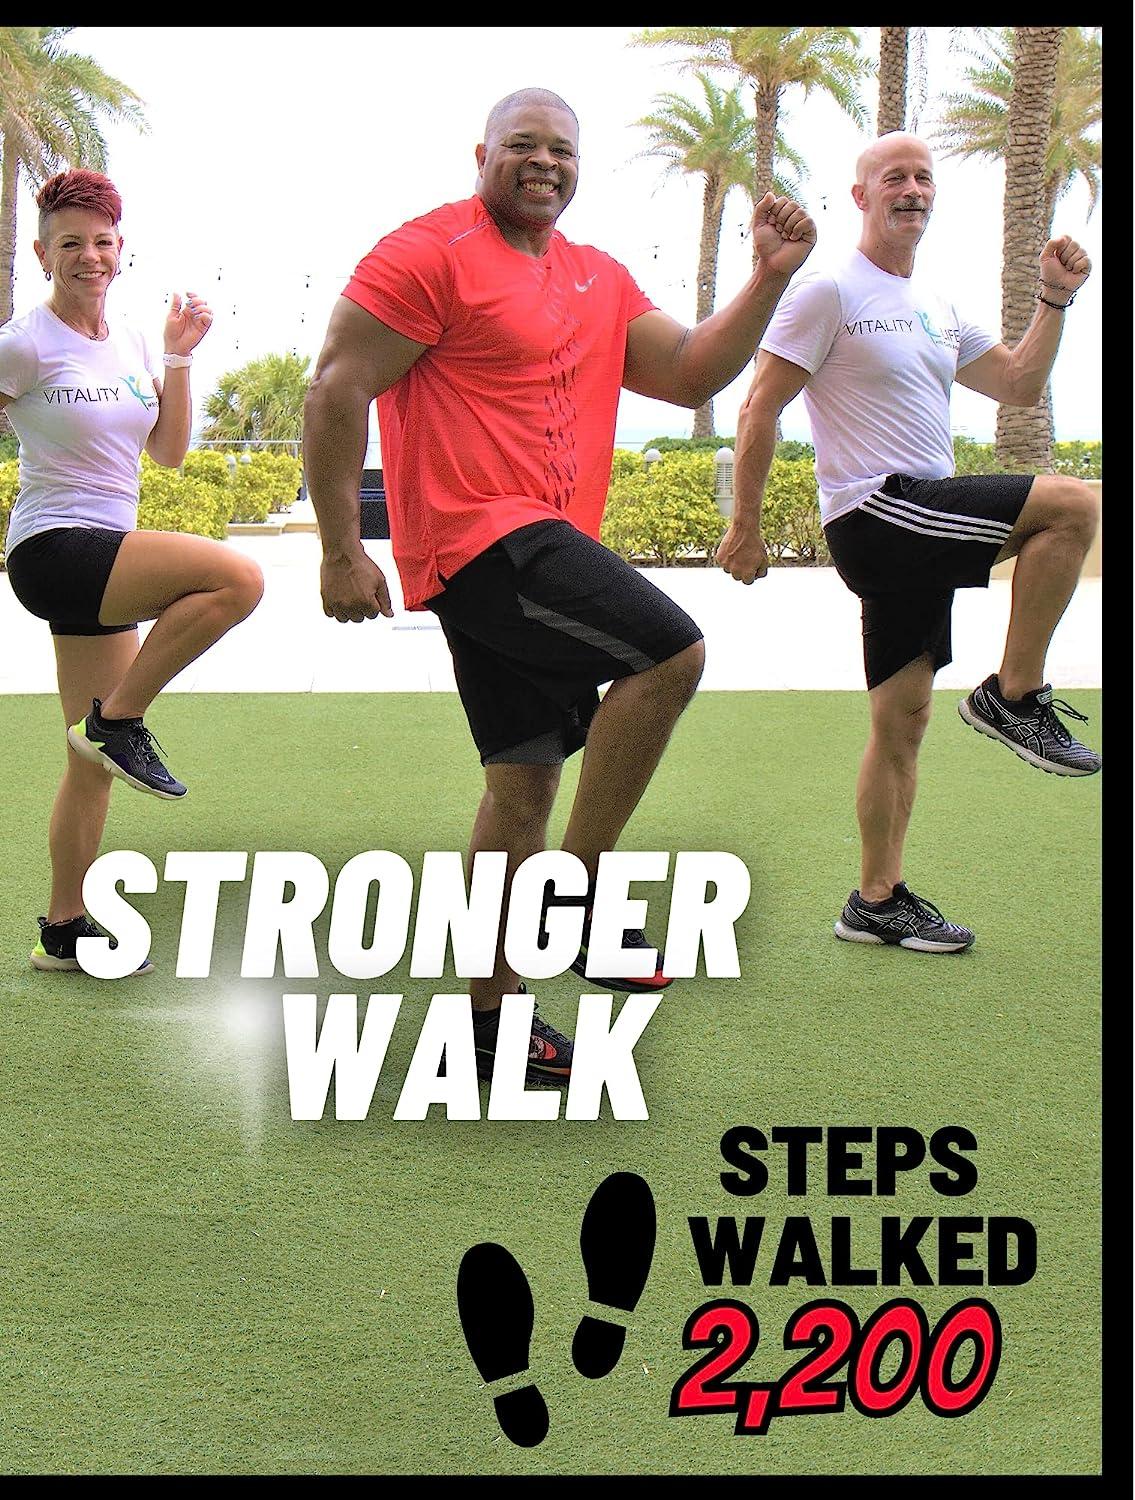 WALK FITNESS DVD - Walk off the weight & feel great! Maximize your  metabolism, build strength, stamina & muscle. Walk and firm exercise videos  Walking workout exercise DVD Low impact workout DVD